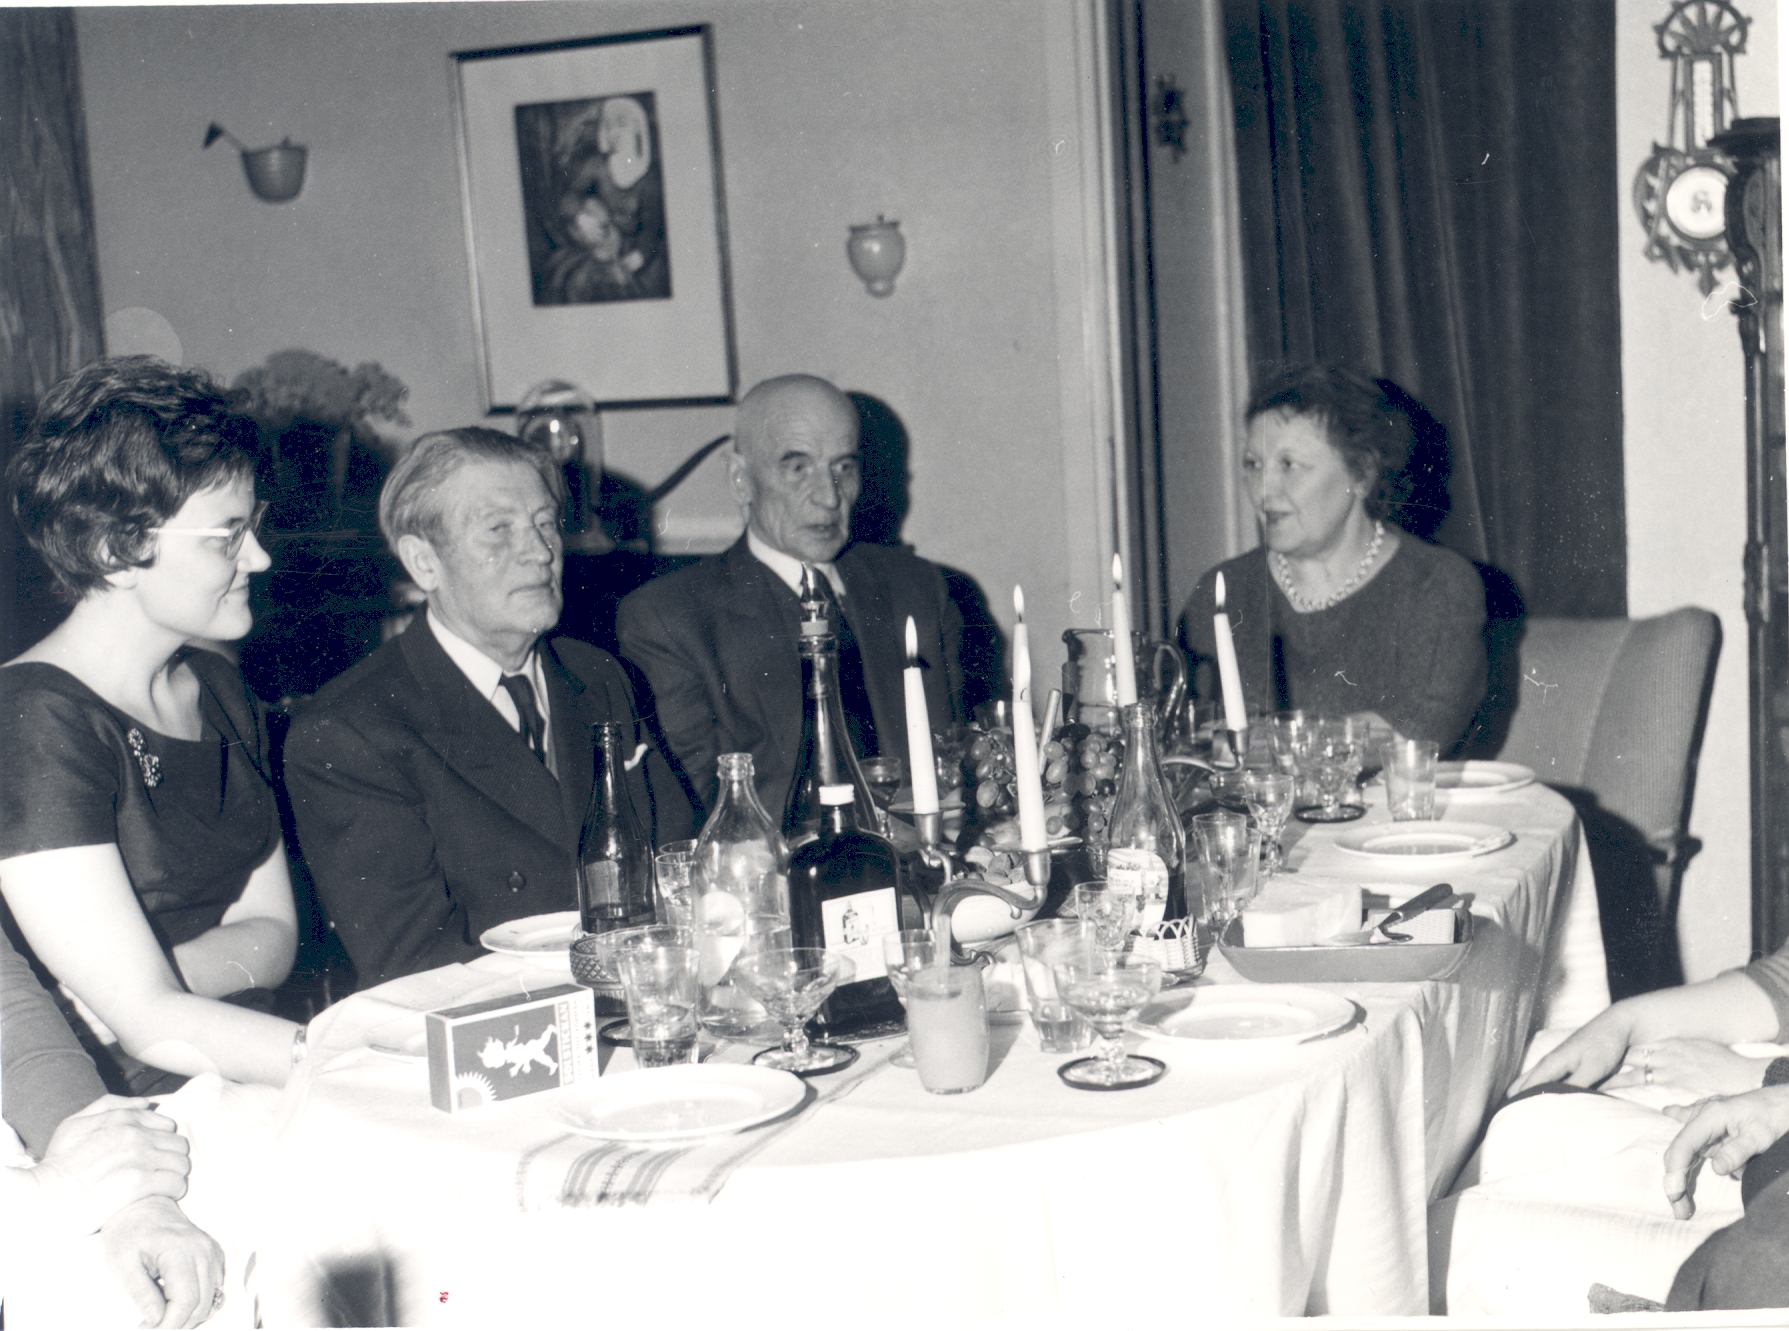 Johannes Aavik, Artur Adson, etc. Adoption of the new year in 1963